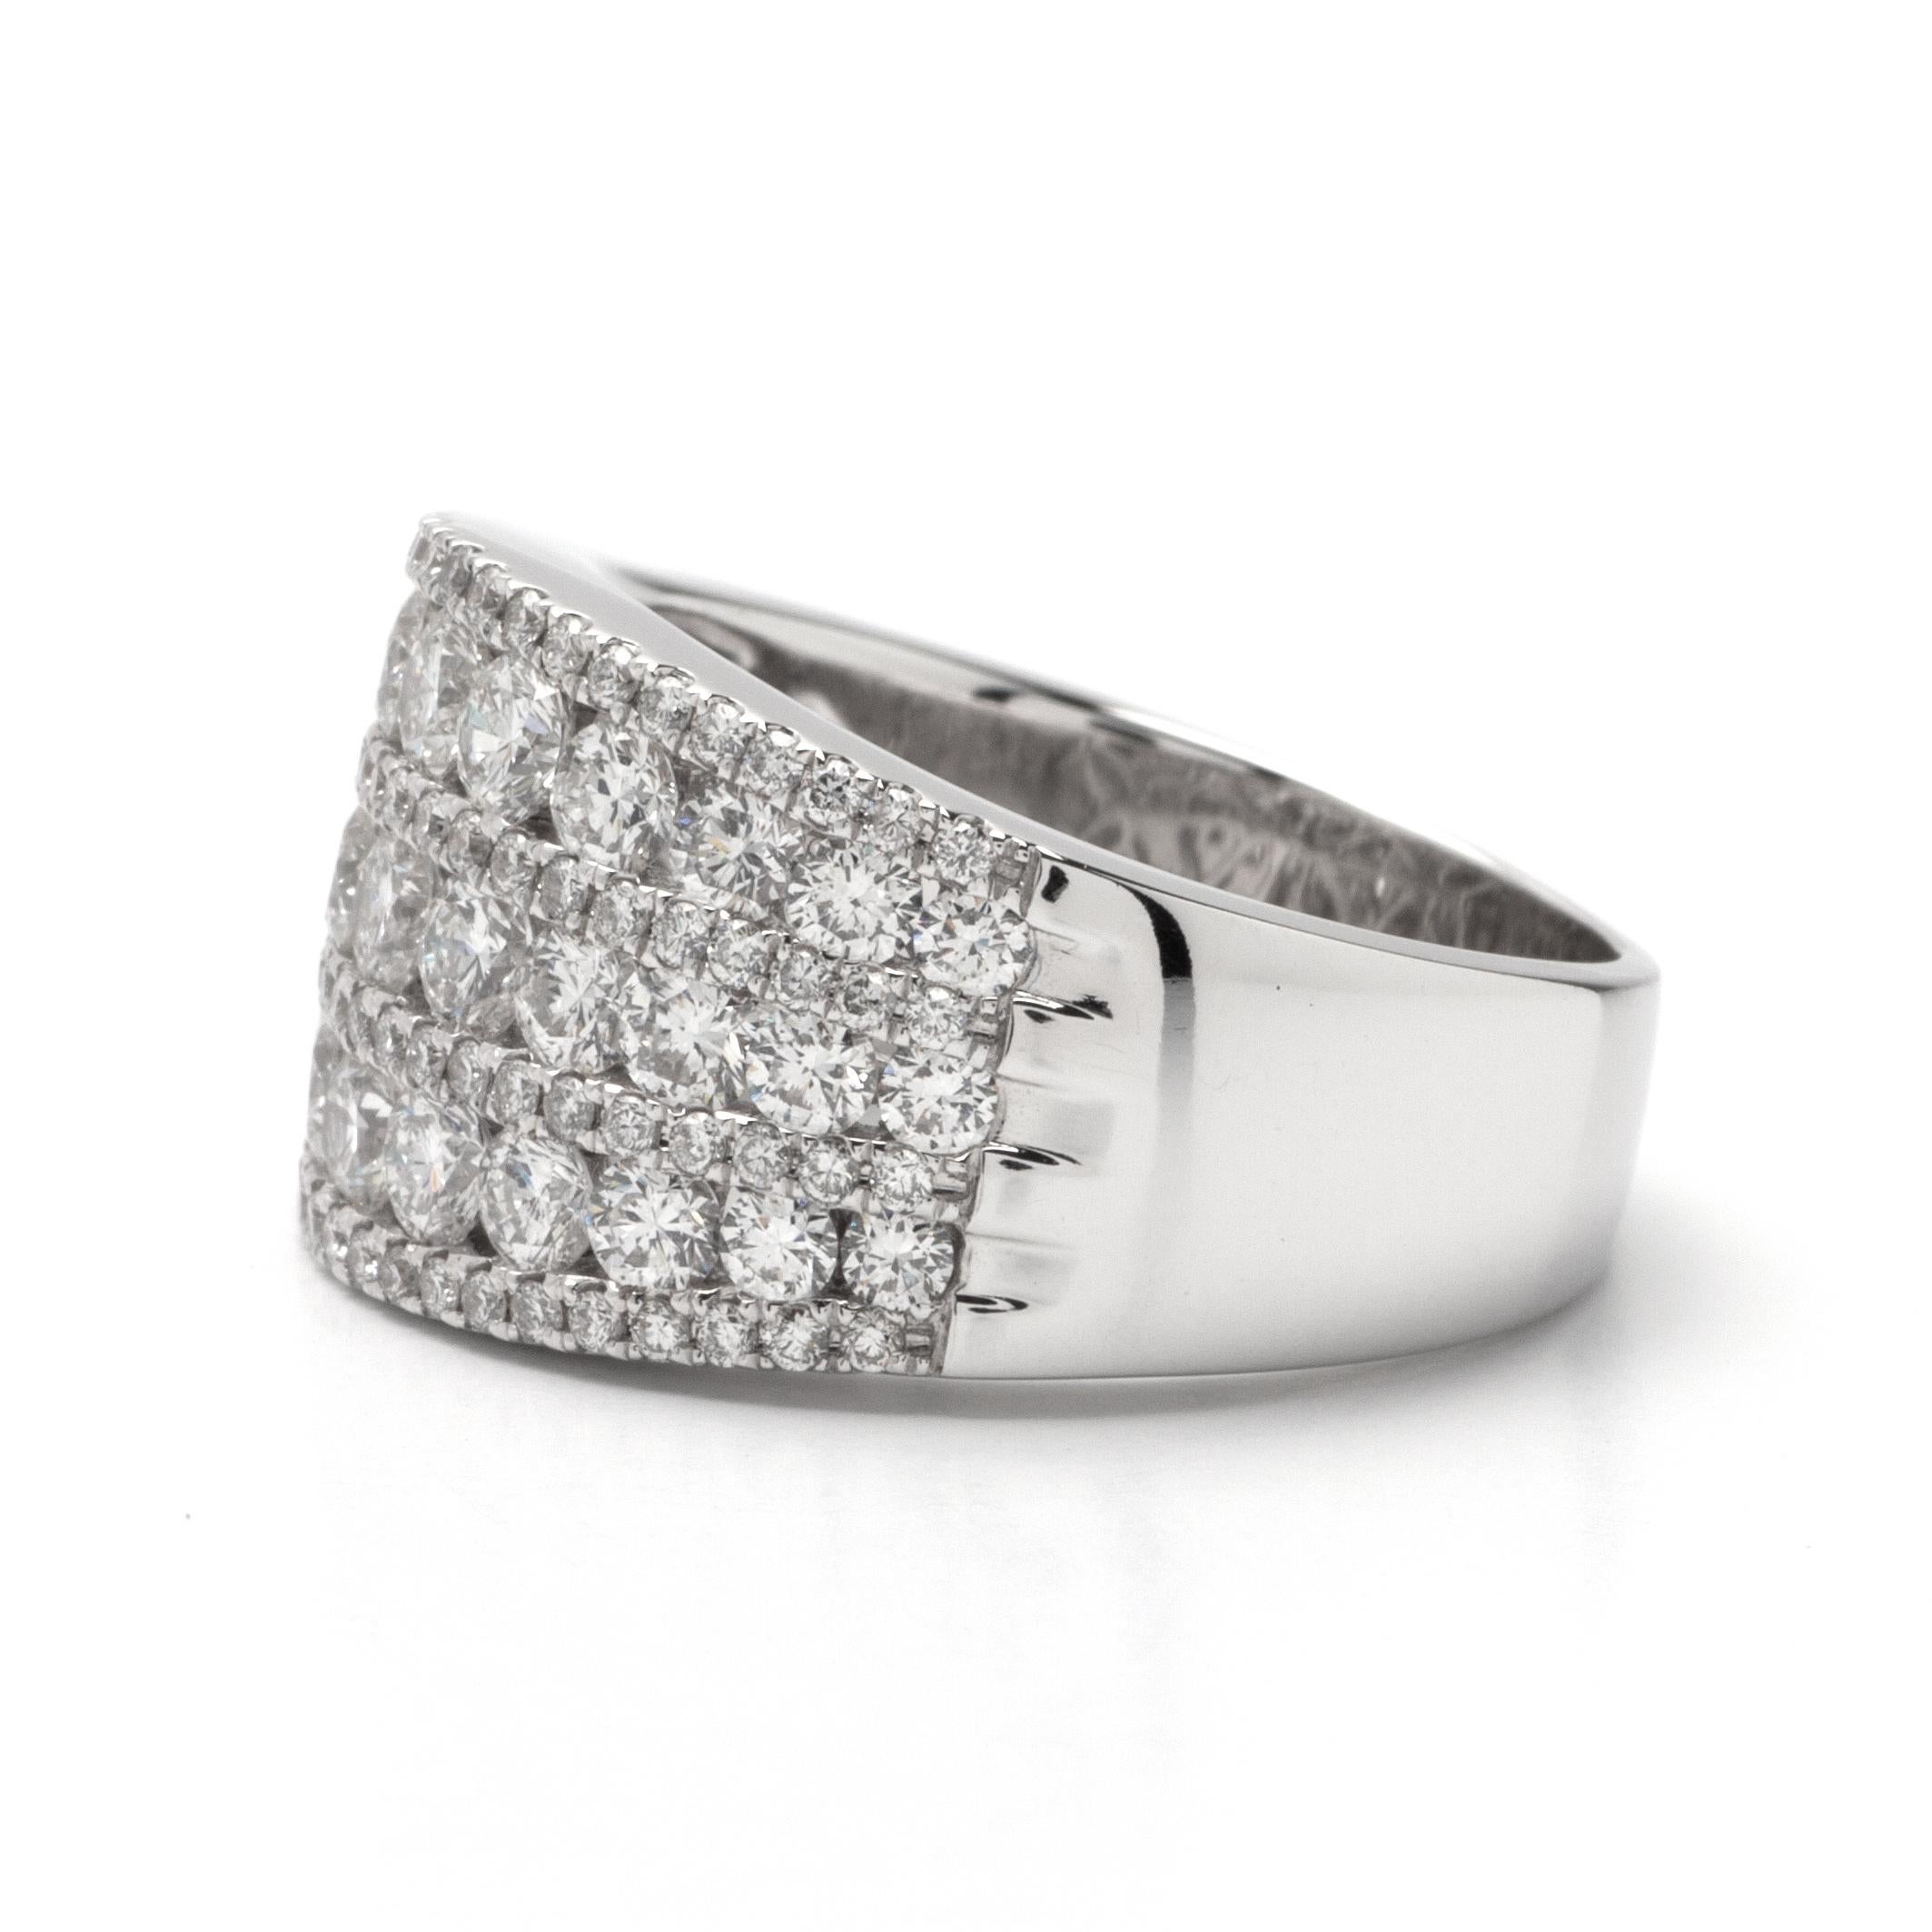 This wedding band is G color, VS1 clarity of 2.30ct side diamonds set in 14K white gold. Available in 14k, 18k white gold, yellow gold, rose gold, and platinum. 